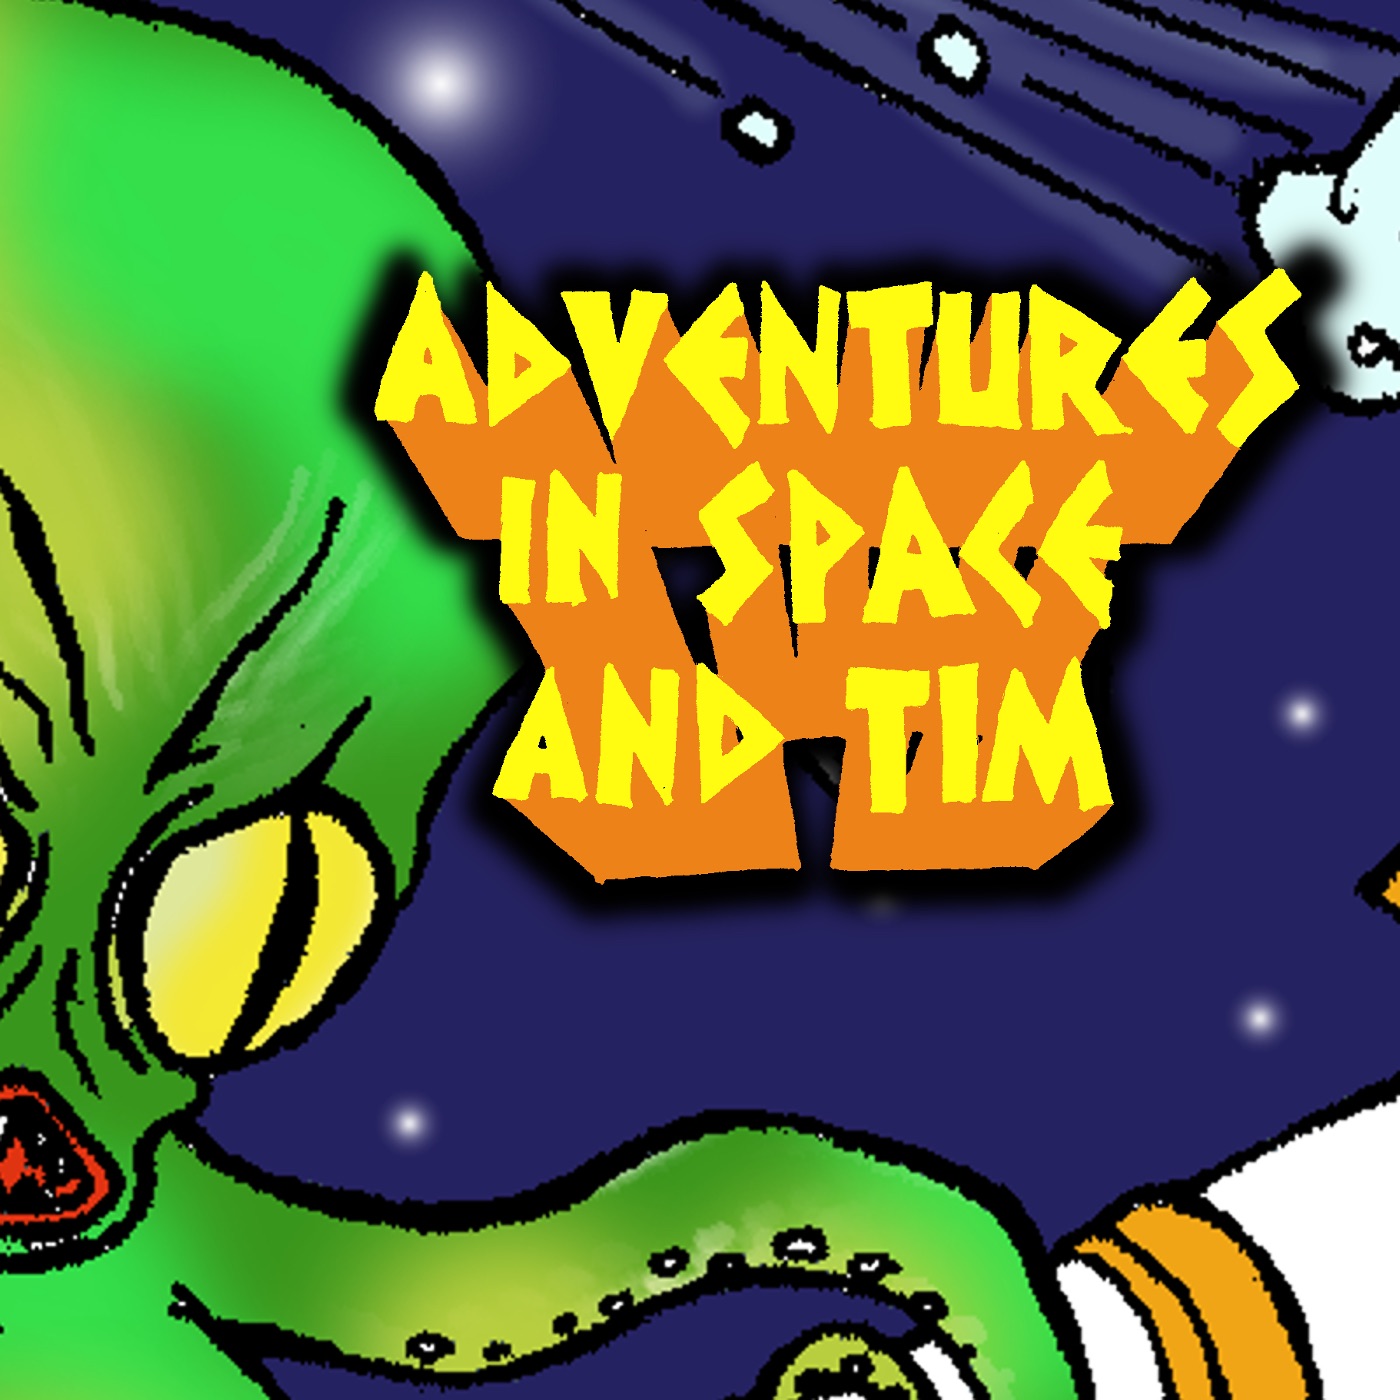 Adventures in Space and Tim